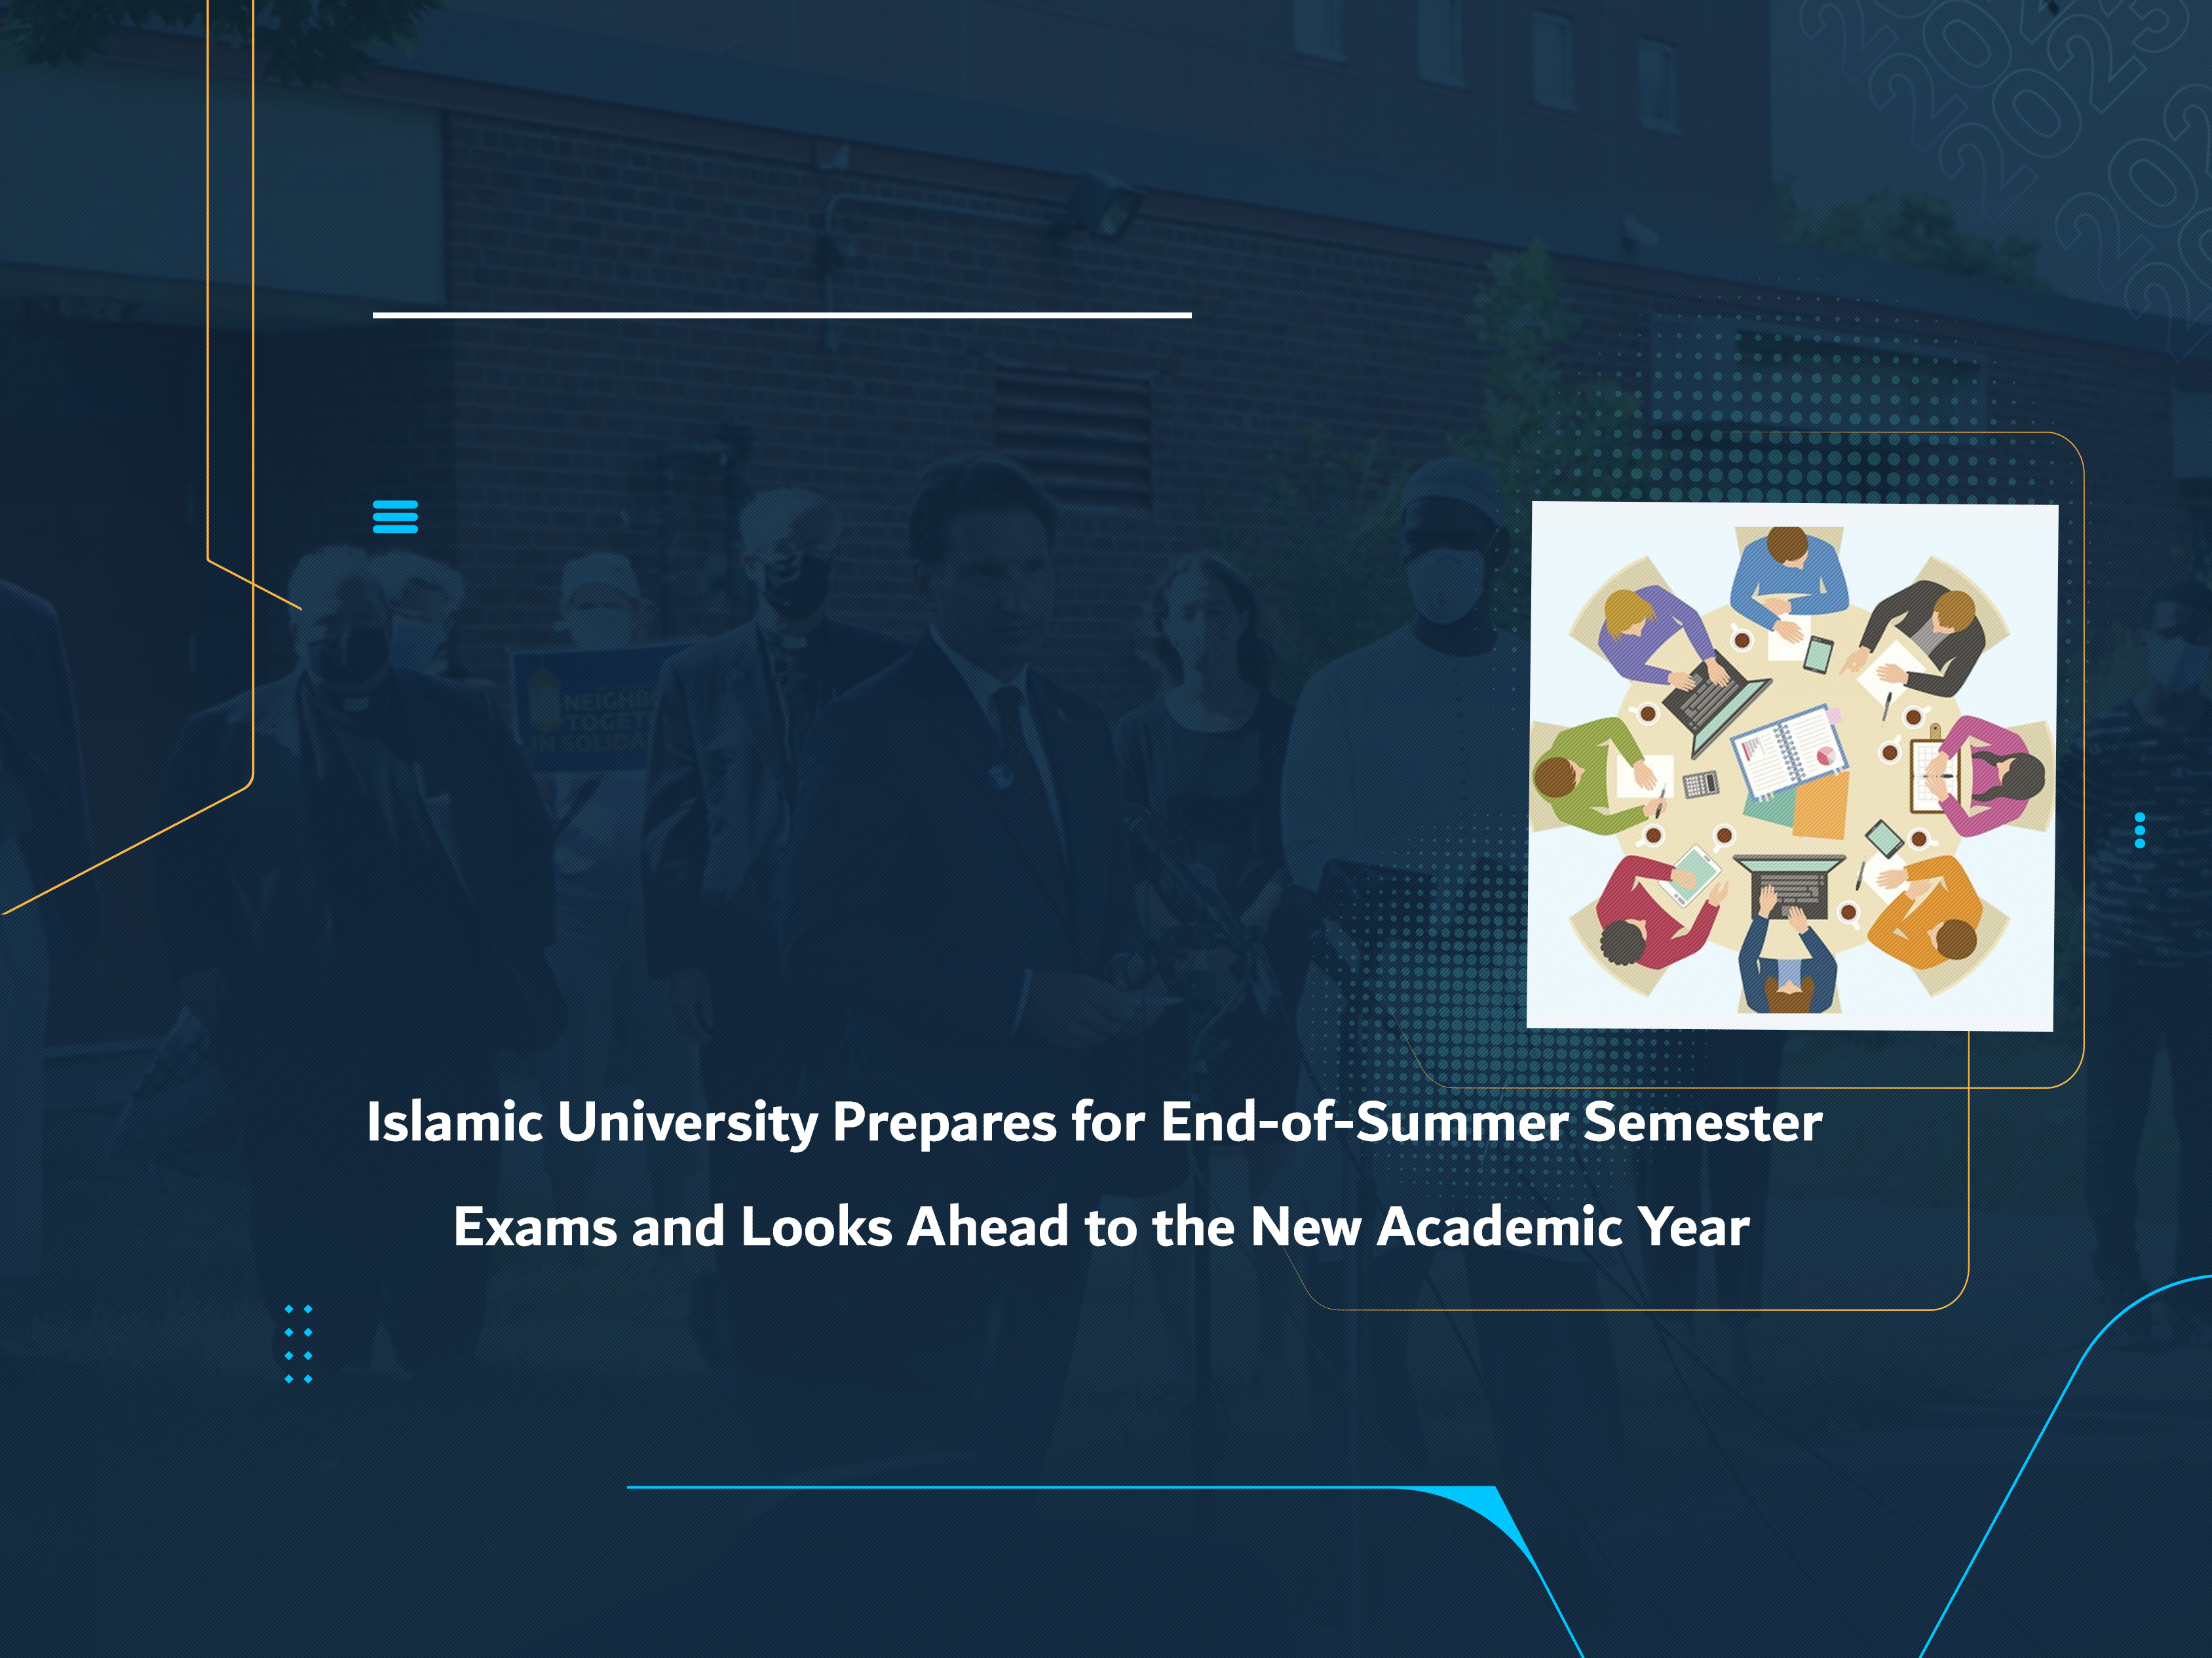 Islamic University Prepares for End-of-Summer Semester Exams and Looks Ahead to the New Academic Year